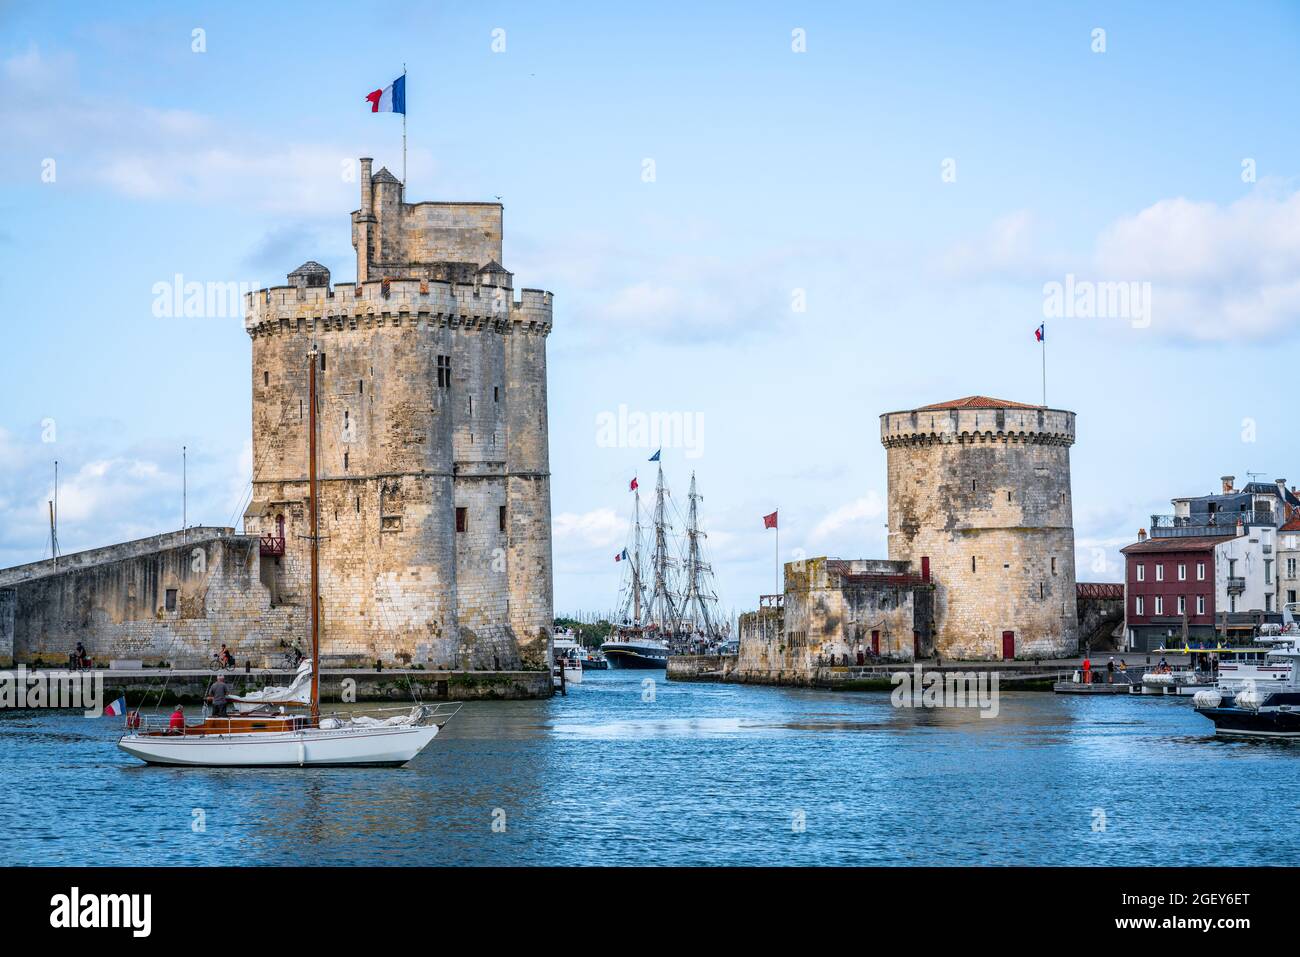 The Chain and Saint Nicolas towers of La Rochelle during summer with blue sky marking the entryway of the old port of La Rochelle France Stock Photo